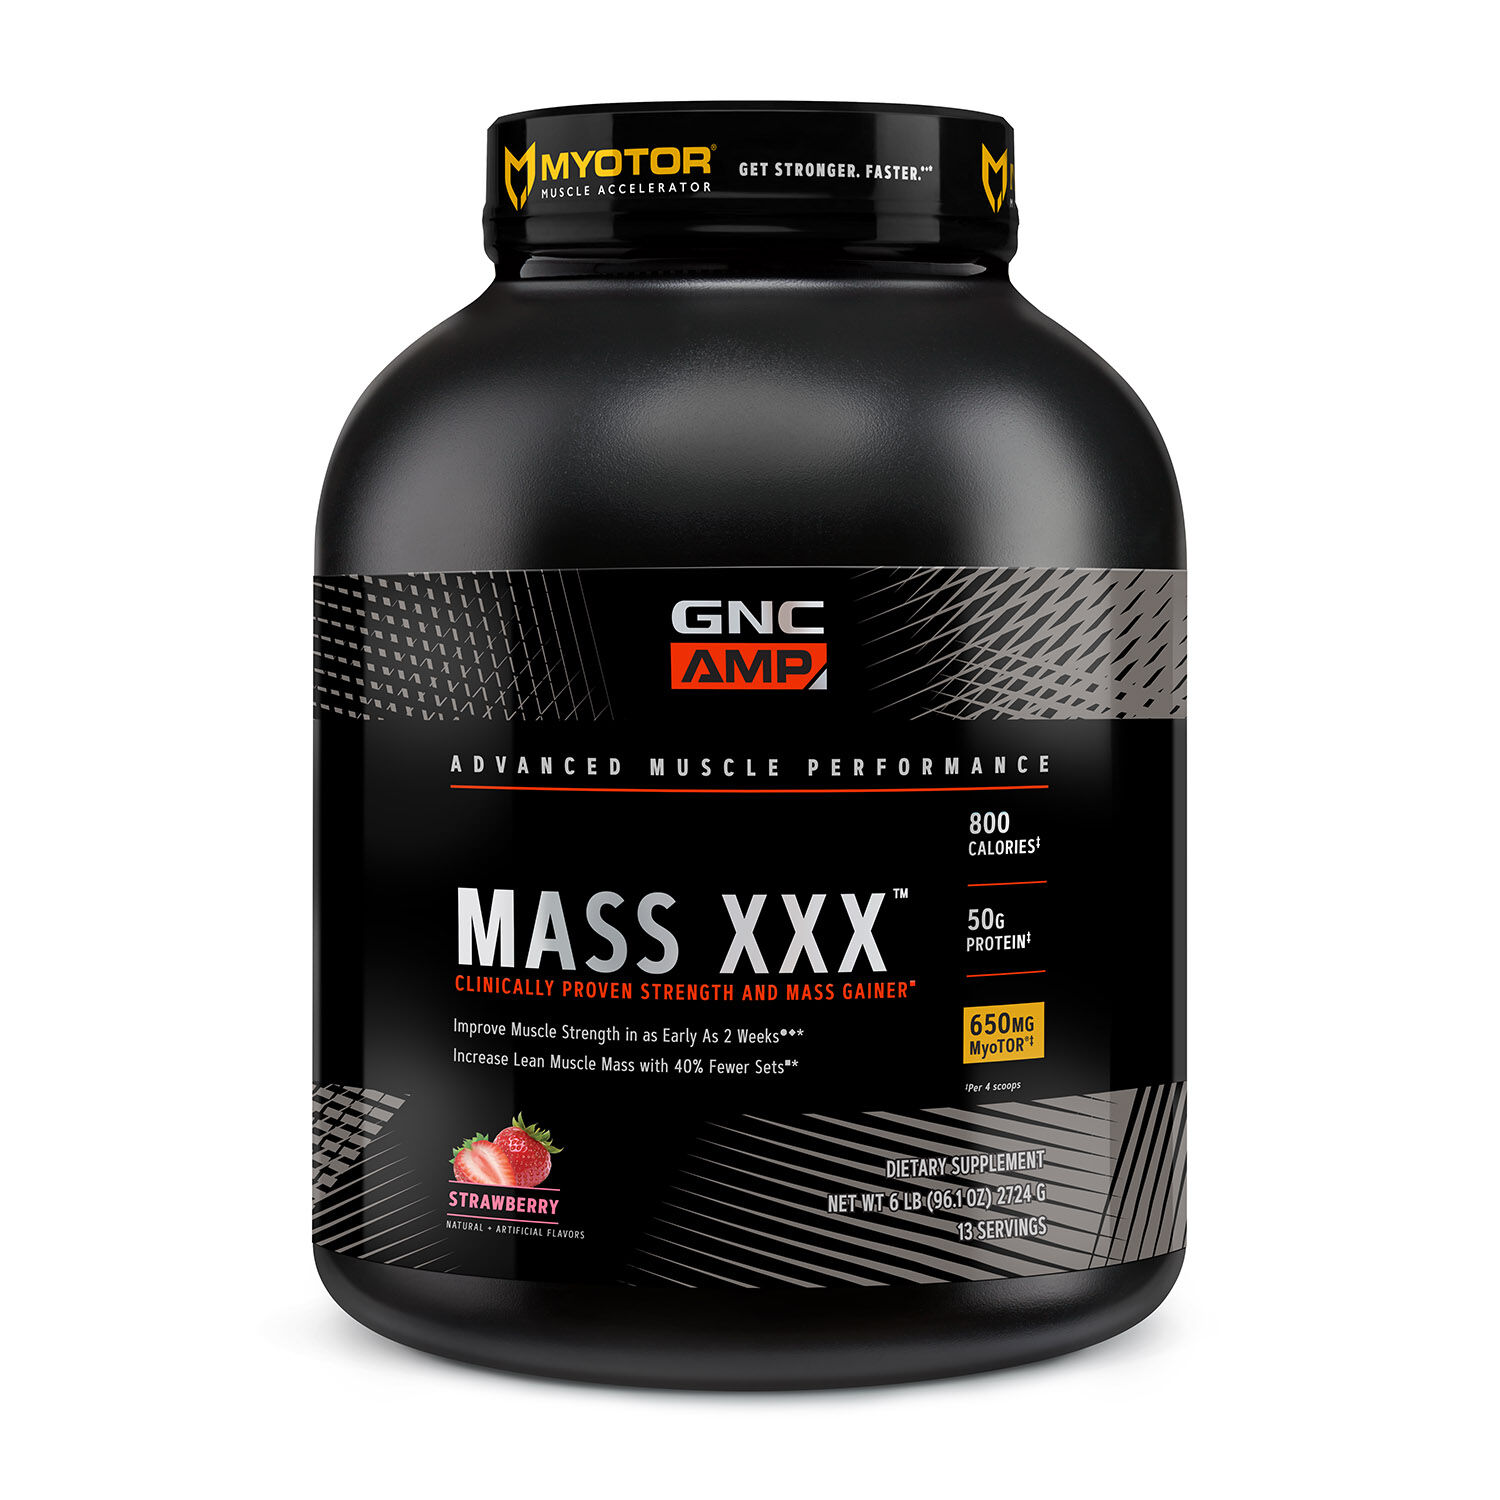 GNC AMP Mass XXX Strawberry with MyoTor Front Tub